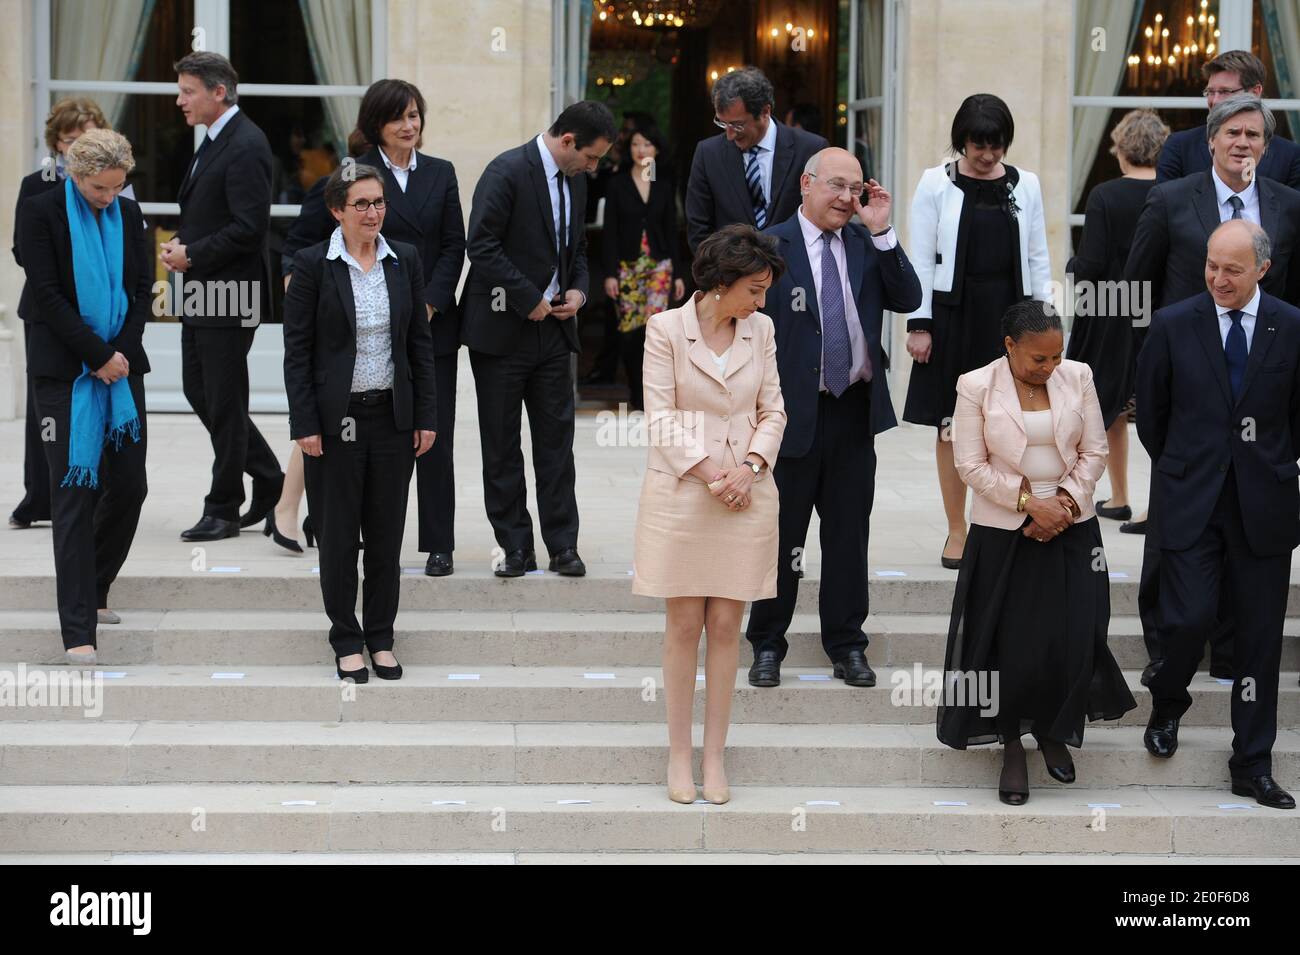 Group photograph of the new French Government taken at the Elysee Palace in Paris, France, on May 17, 2012. From top - JM for Junior Minister and M for Minister (1st row, LtoR) JM for SMEs, Innovations and Digital Economy, Fleur Pellerin; JM for French Living Abroad and Francophony, Yamina Benguigui; JM for Disabled People, Marie-Arlette Carlotti; JM for Social and Solidarity Economy, Benoit Hamon; JM for the Elderly and Disabled, Michele Delaunay; JM for Cities Francois Lamy; JM for European Affairs Bernard Cazeneuve; JM for Handicraft, Tourism and Trade, Sylvia Pinel; JM for Family Dominique Stock Photo